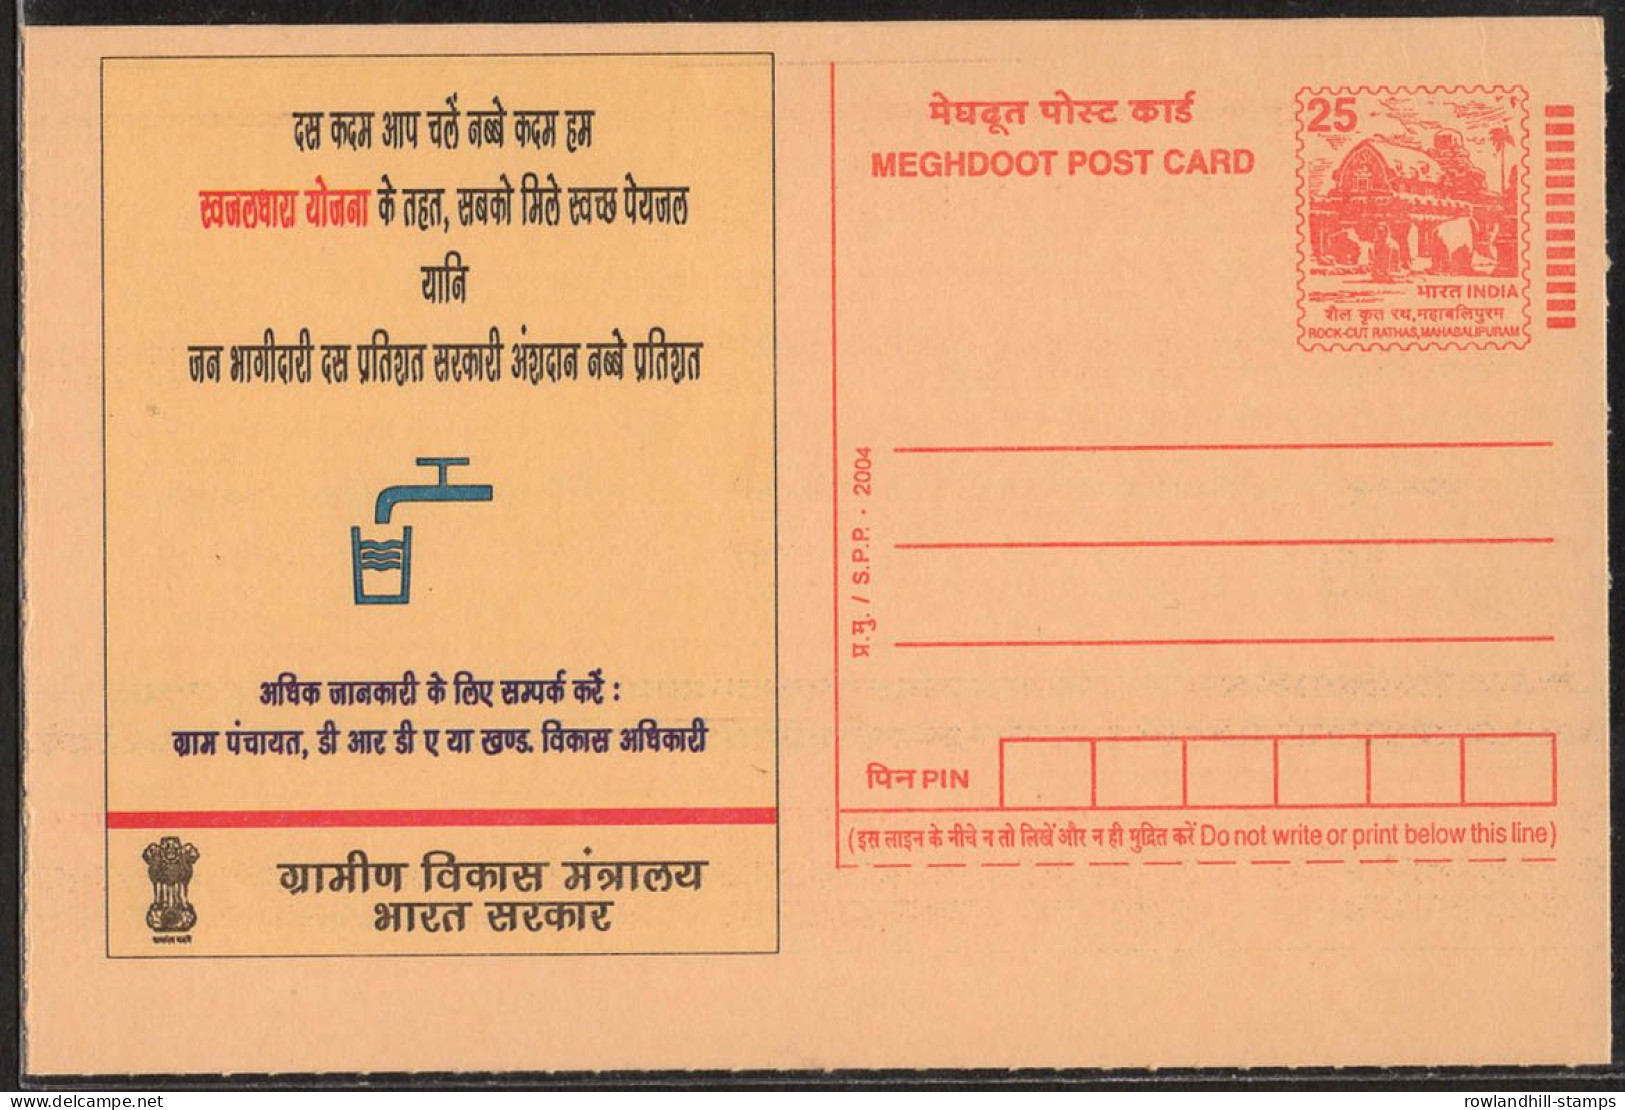 India, 2004, Rural Development DRINKING WATER, Meghdoot Postcard, Conservation, Stationery, Environment, Nature, B23 - Acqua